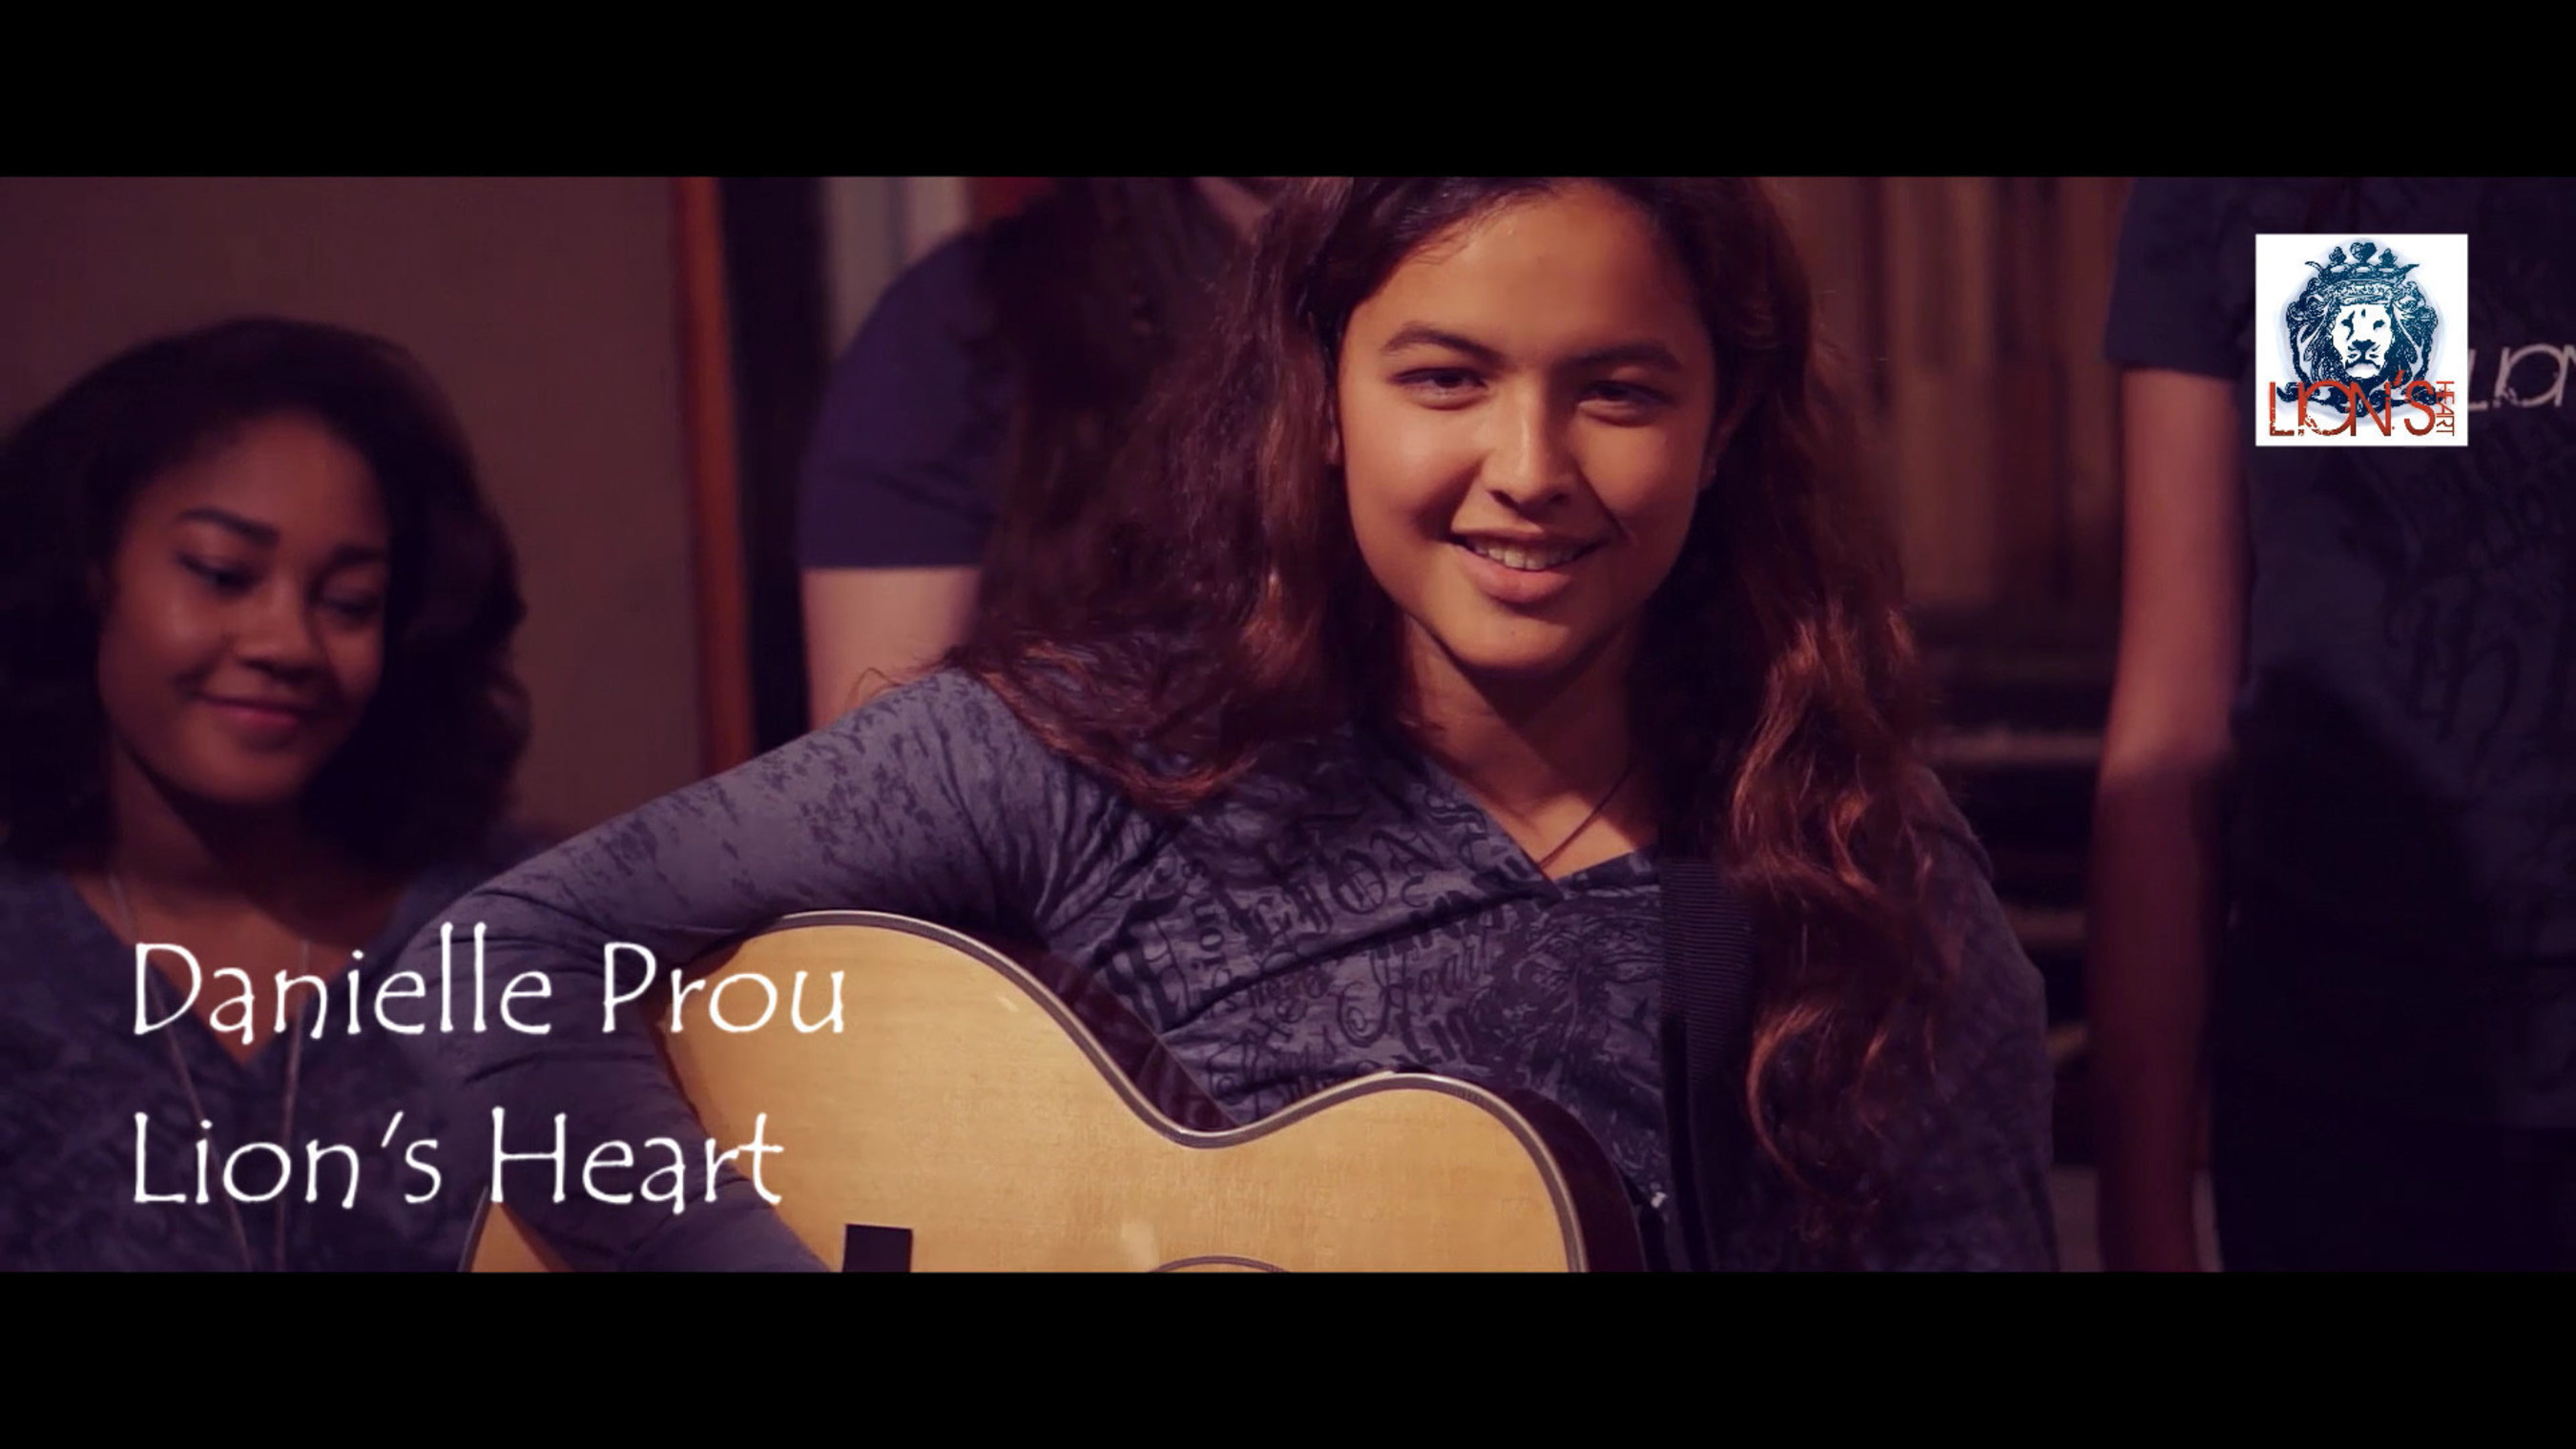 Recording Artist Danielle Prou, 15, has been named the national spokeswoman for Lion's Heart, a teen volunteer organization representing more than 4,200 student volunteers from 45 chapters around the country.